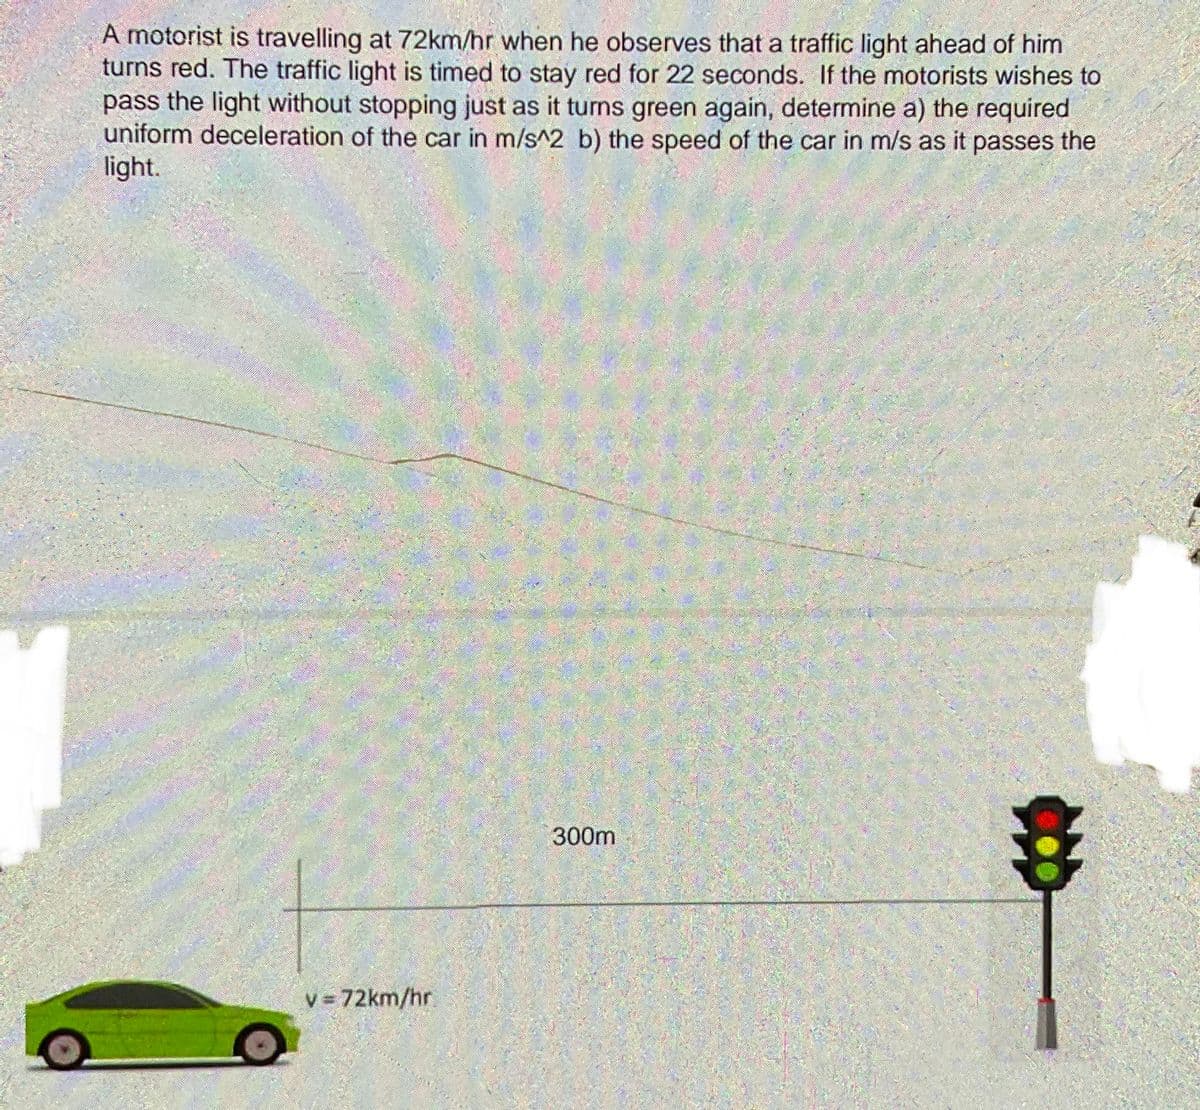 A motorist is travelling at 72km/hr when he observes that a traffic light ahead of him
turns red. The traffic light is timed to stay red for 22 seconds. If the motorists wishes to
pass the light without stopping just as it turns green again, determine a) the required
uniform deceleration of the car in m/s^2 b) the speed of the car in m/s as it passes the
light.
300m
v = 72km/hr
